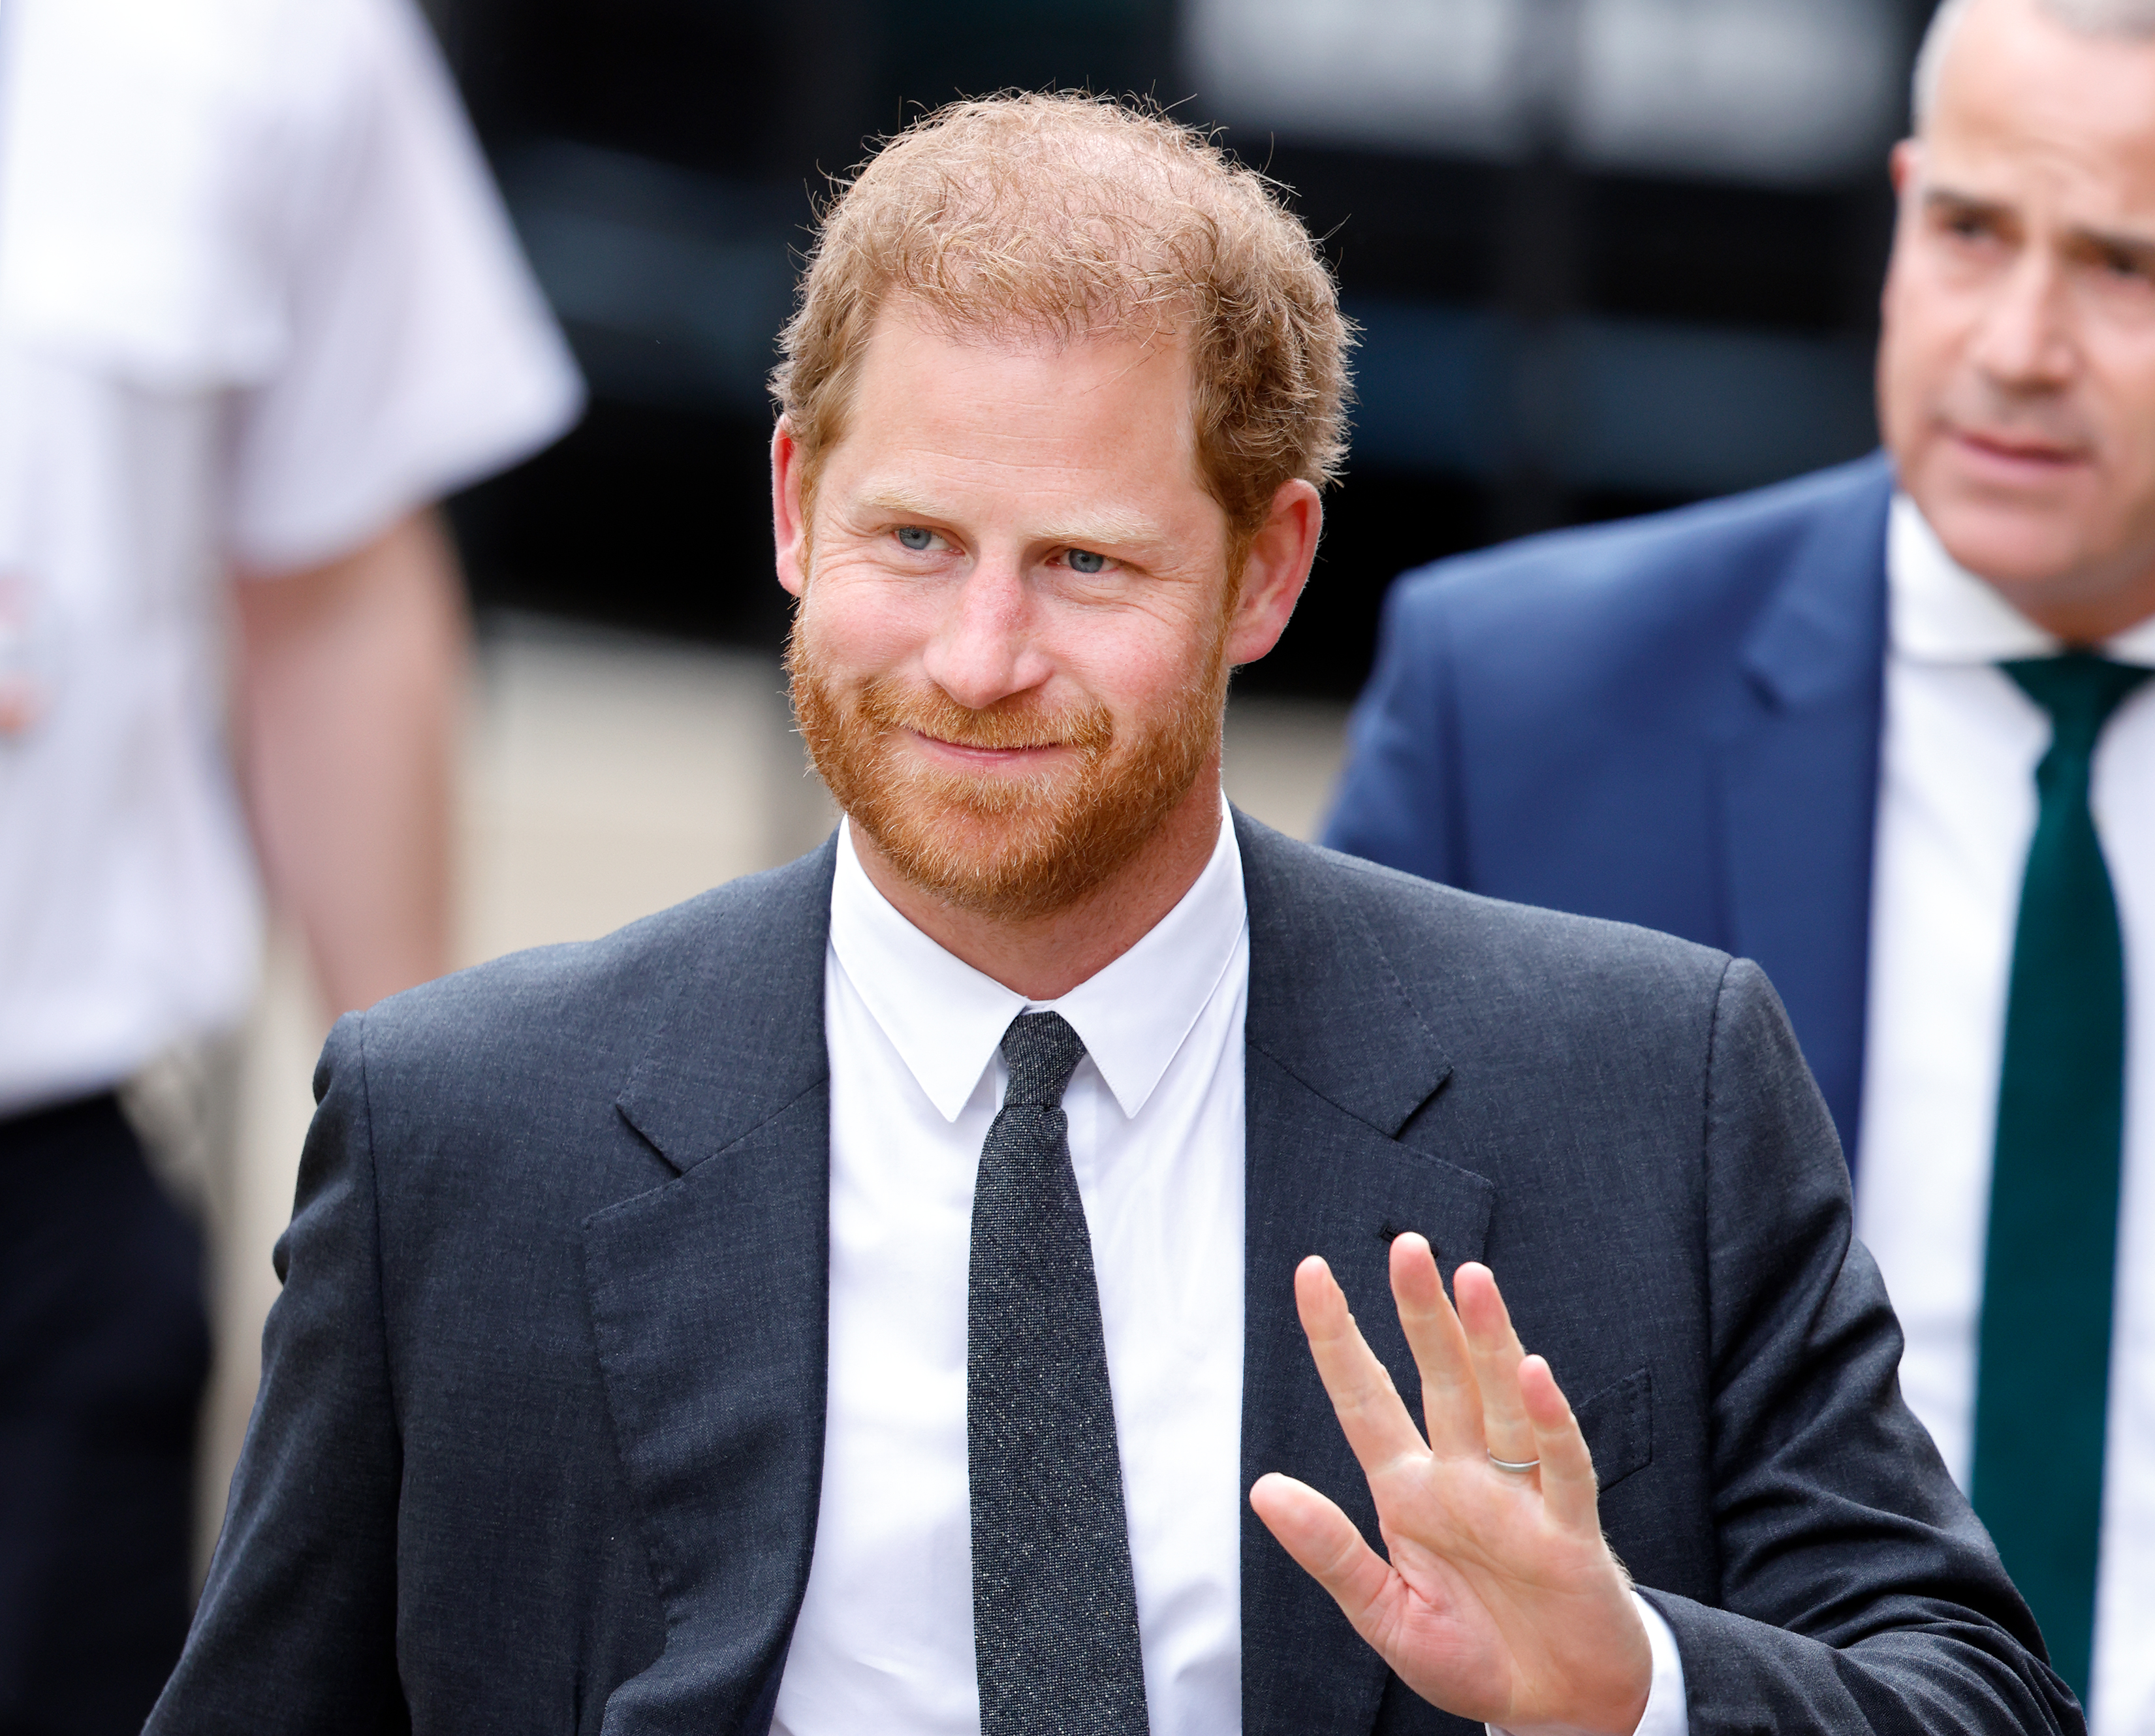 Prince Harry arrives at the Royal Courts of Justice on March 30, 2023 in London, England. | Source: Getty Images